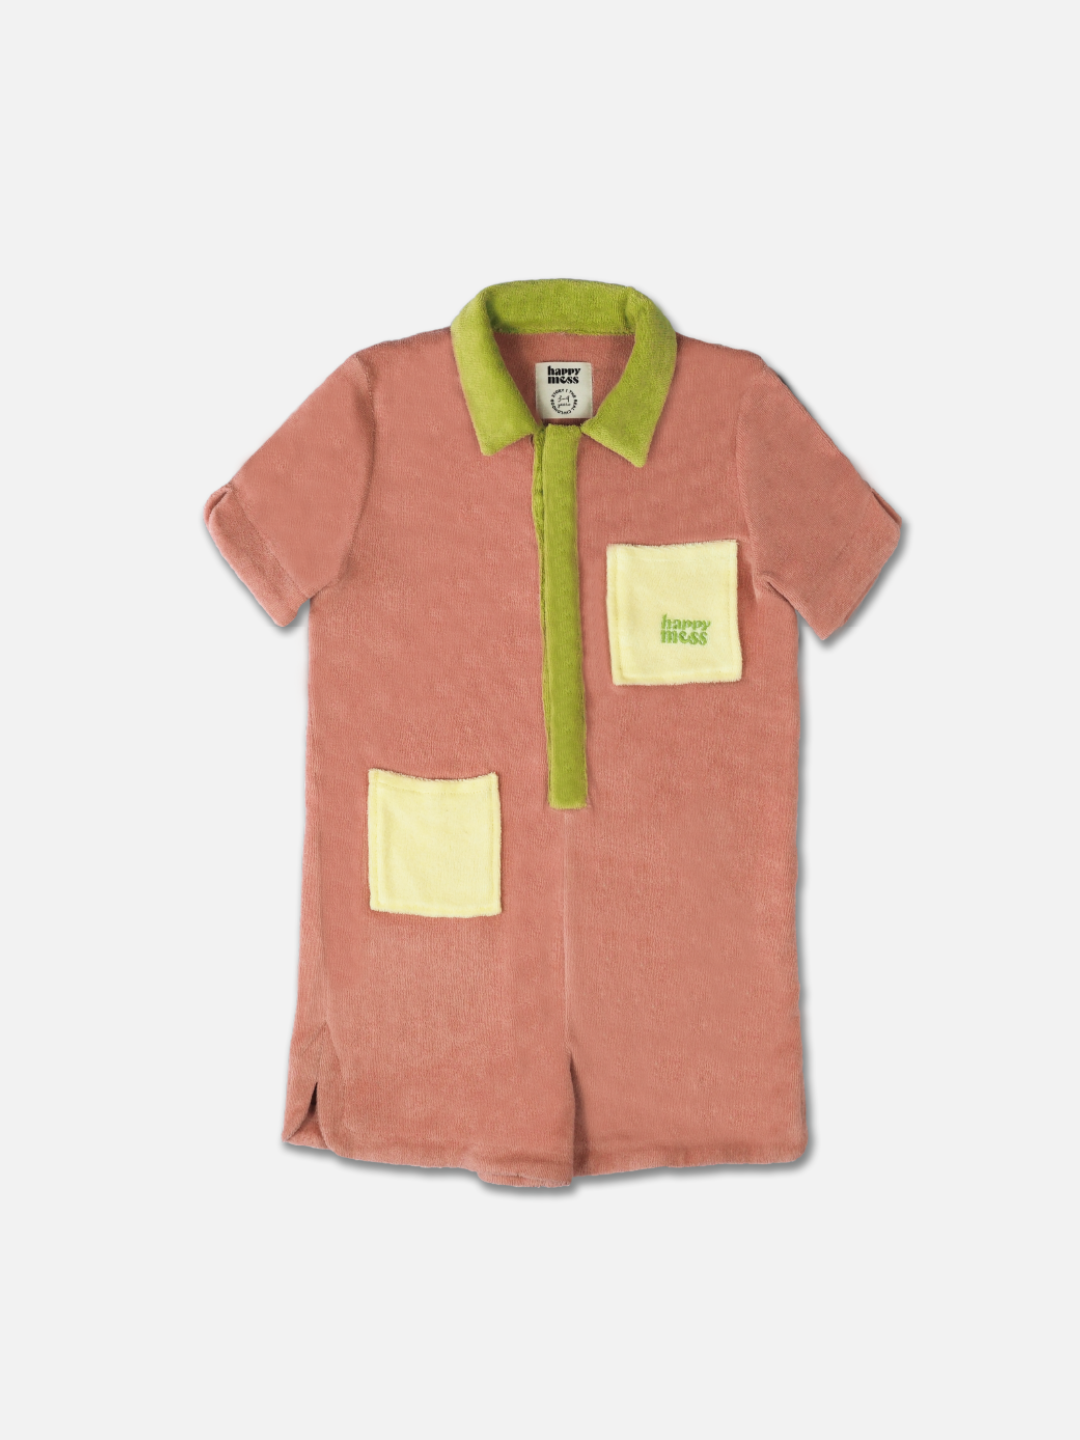 Peach | A kids' jumpsuit in peach with lime green collar and placket, and two yellow pockets